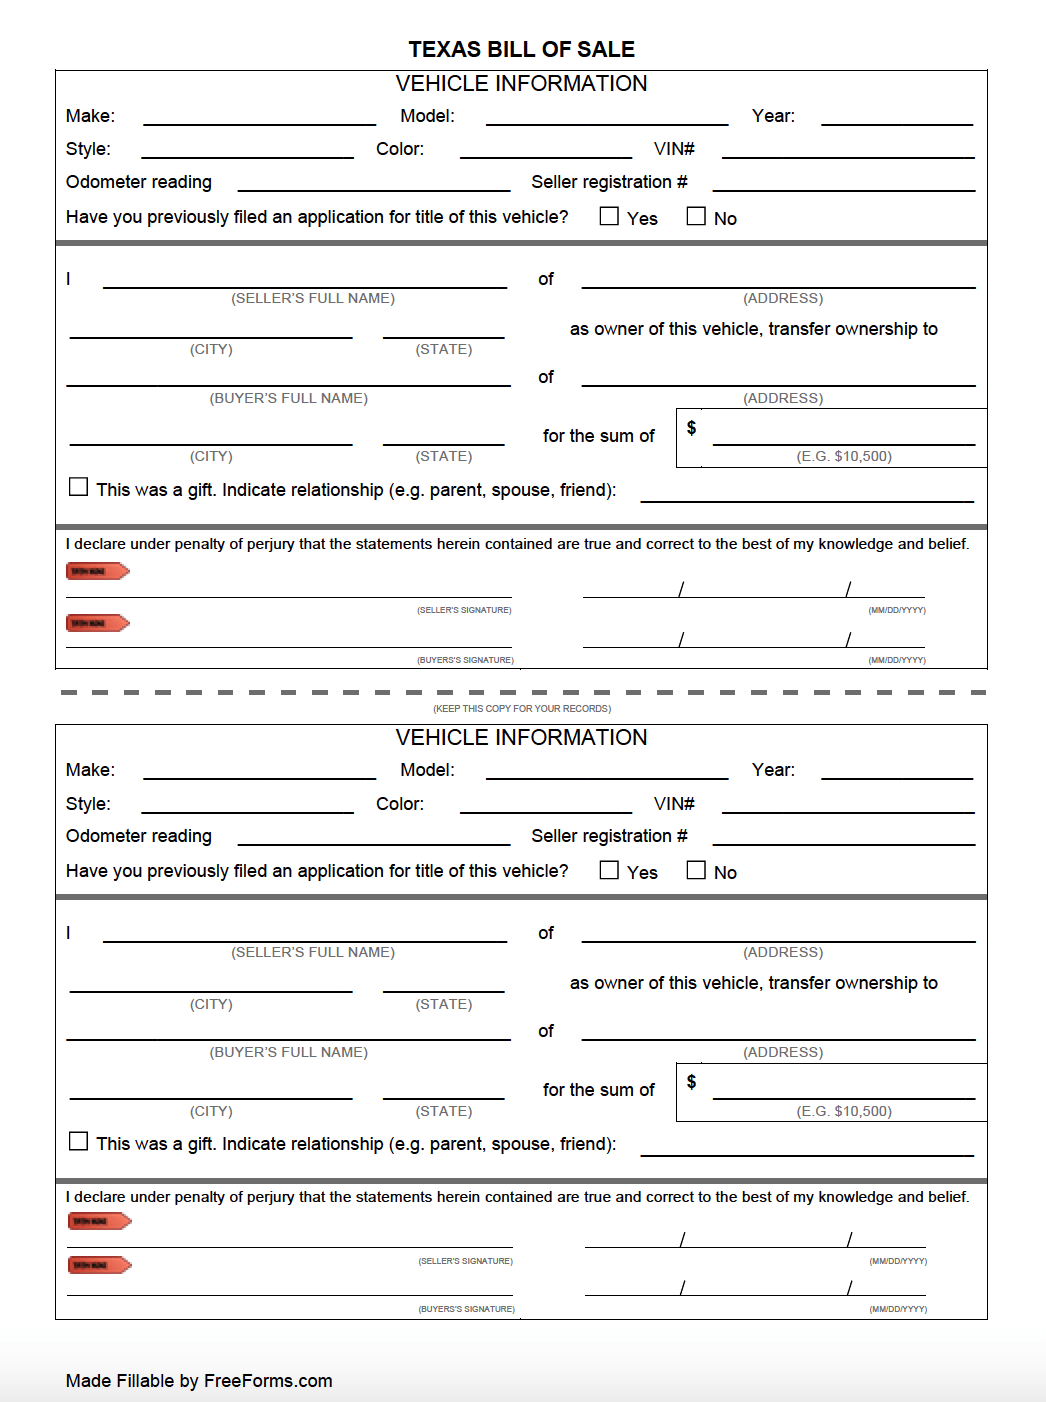 Free Printable Vehicle Bill Of Sale Template from freeforms.com